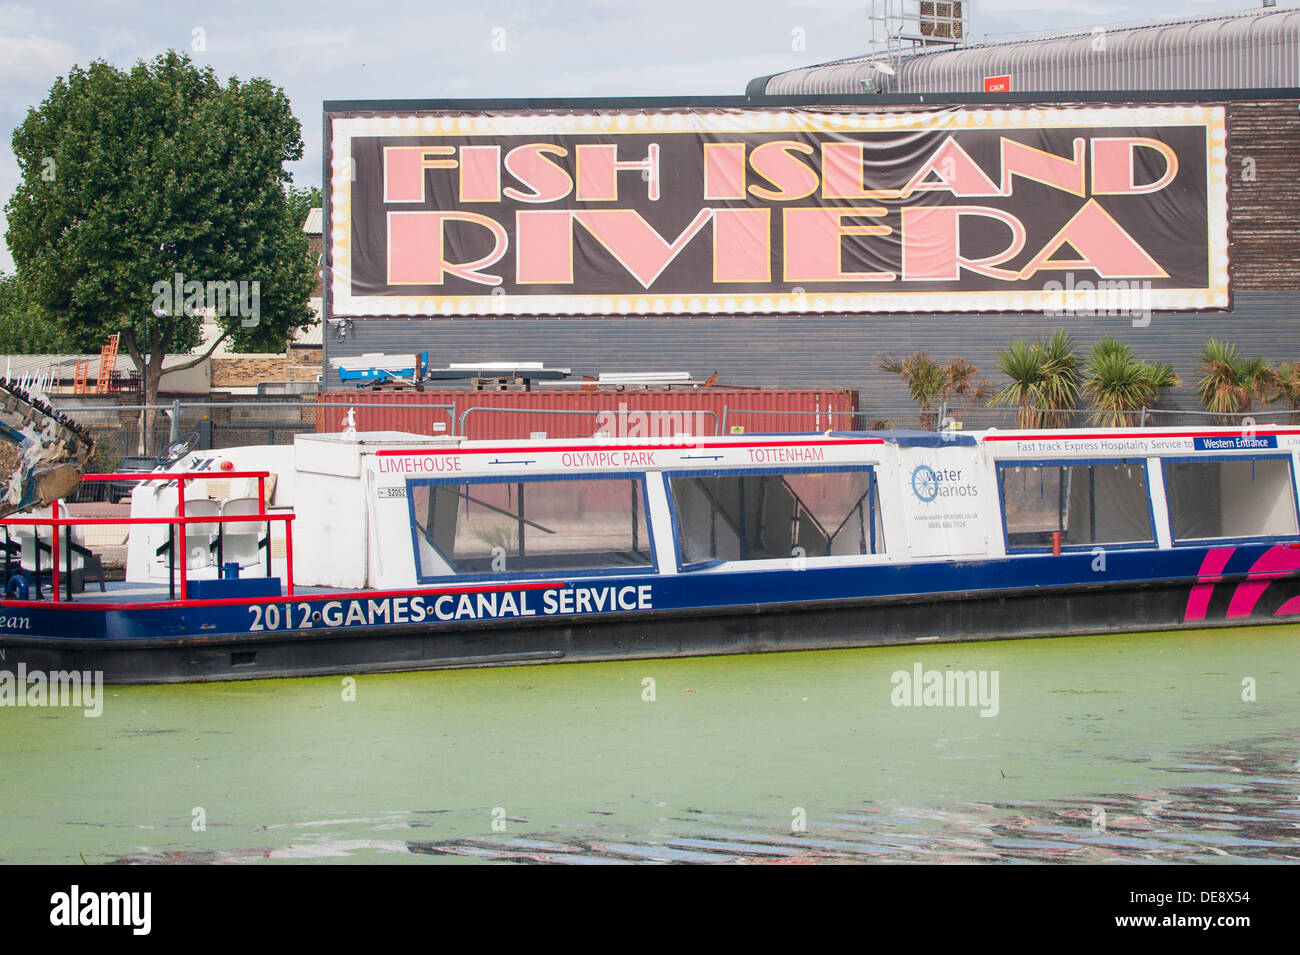 East End London Fish Island Riviera Hackney Wick Cut River Lee Old Ford Lock Hertford Union Canal 2012 Olympics fast track Water Charriots taxi barge Stock Photo